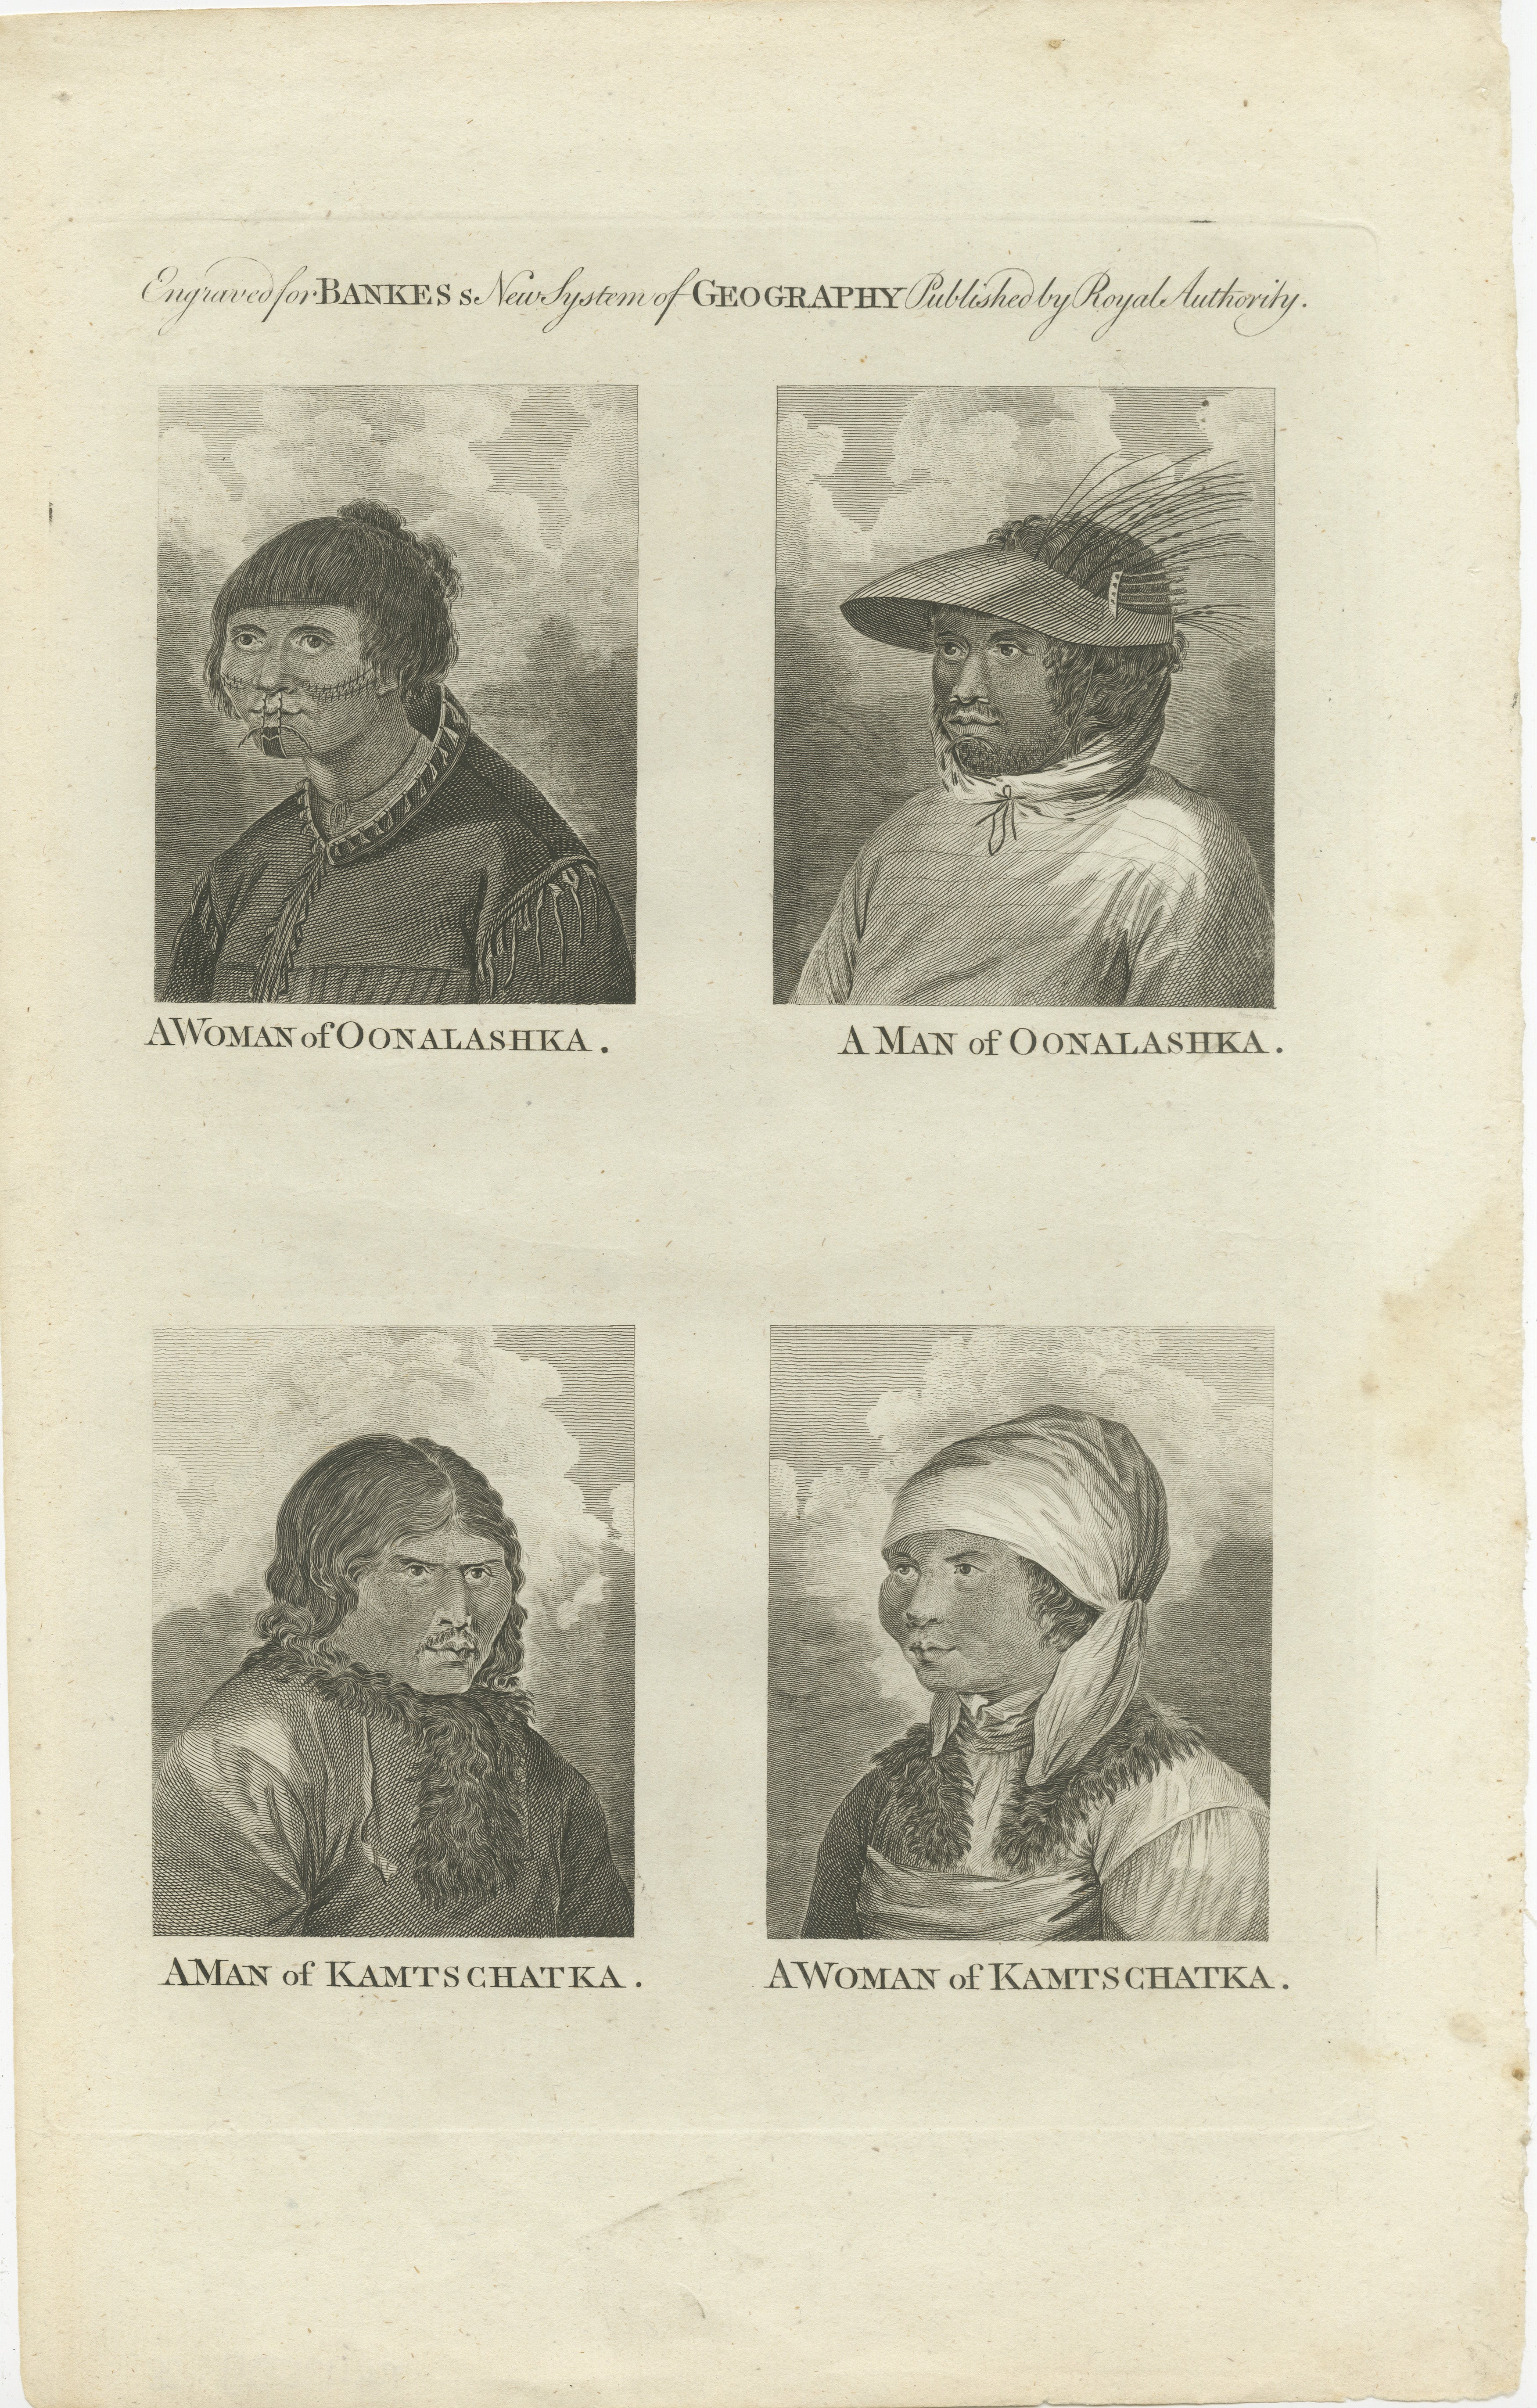 This original engraving contains four portrait engravings, two each of individuals from Unalaska (Oonalashka) and Kamchatka. These engravings, like the previous ones, are from 